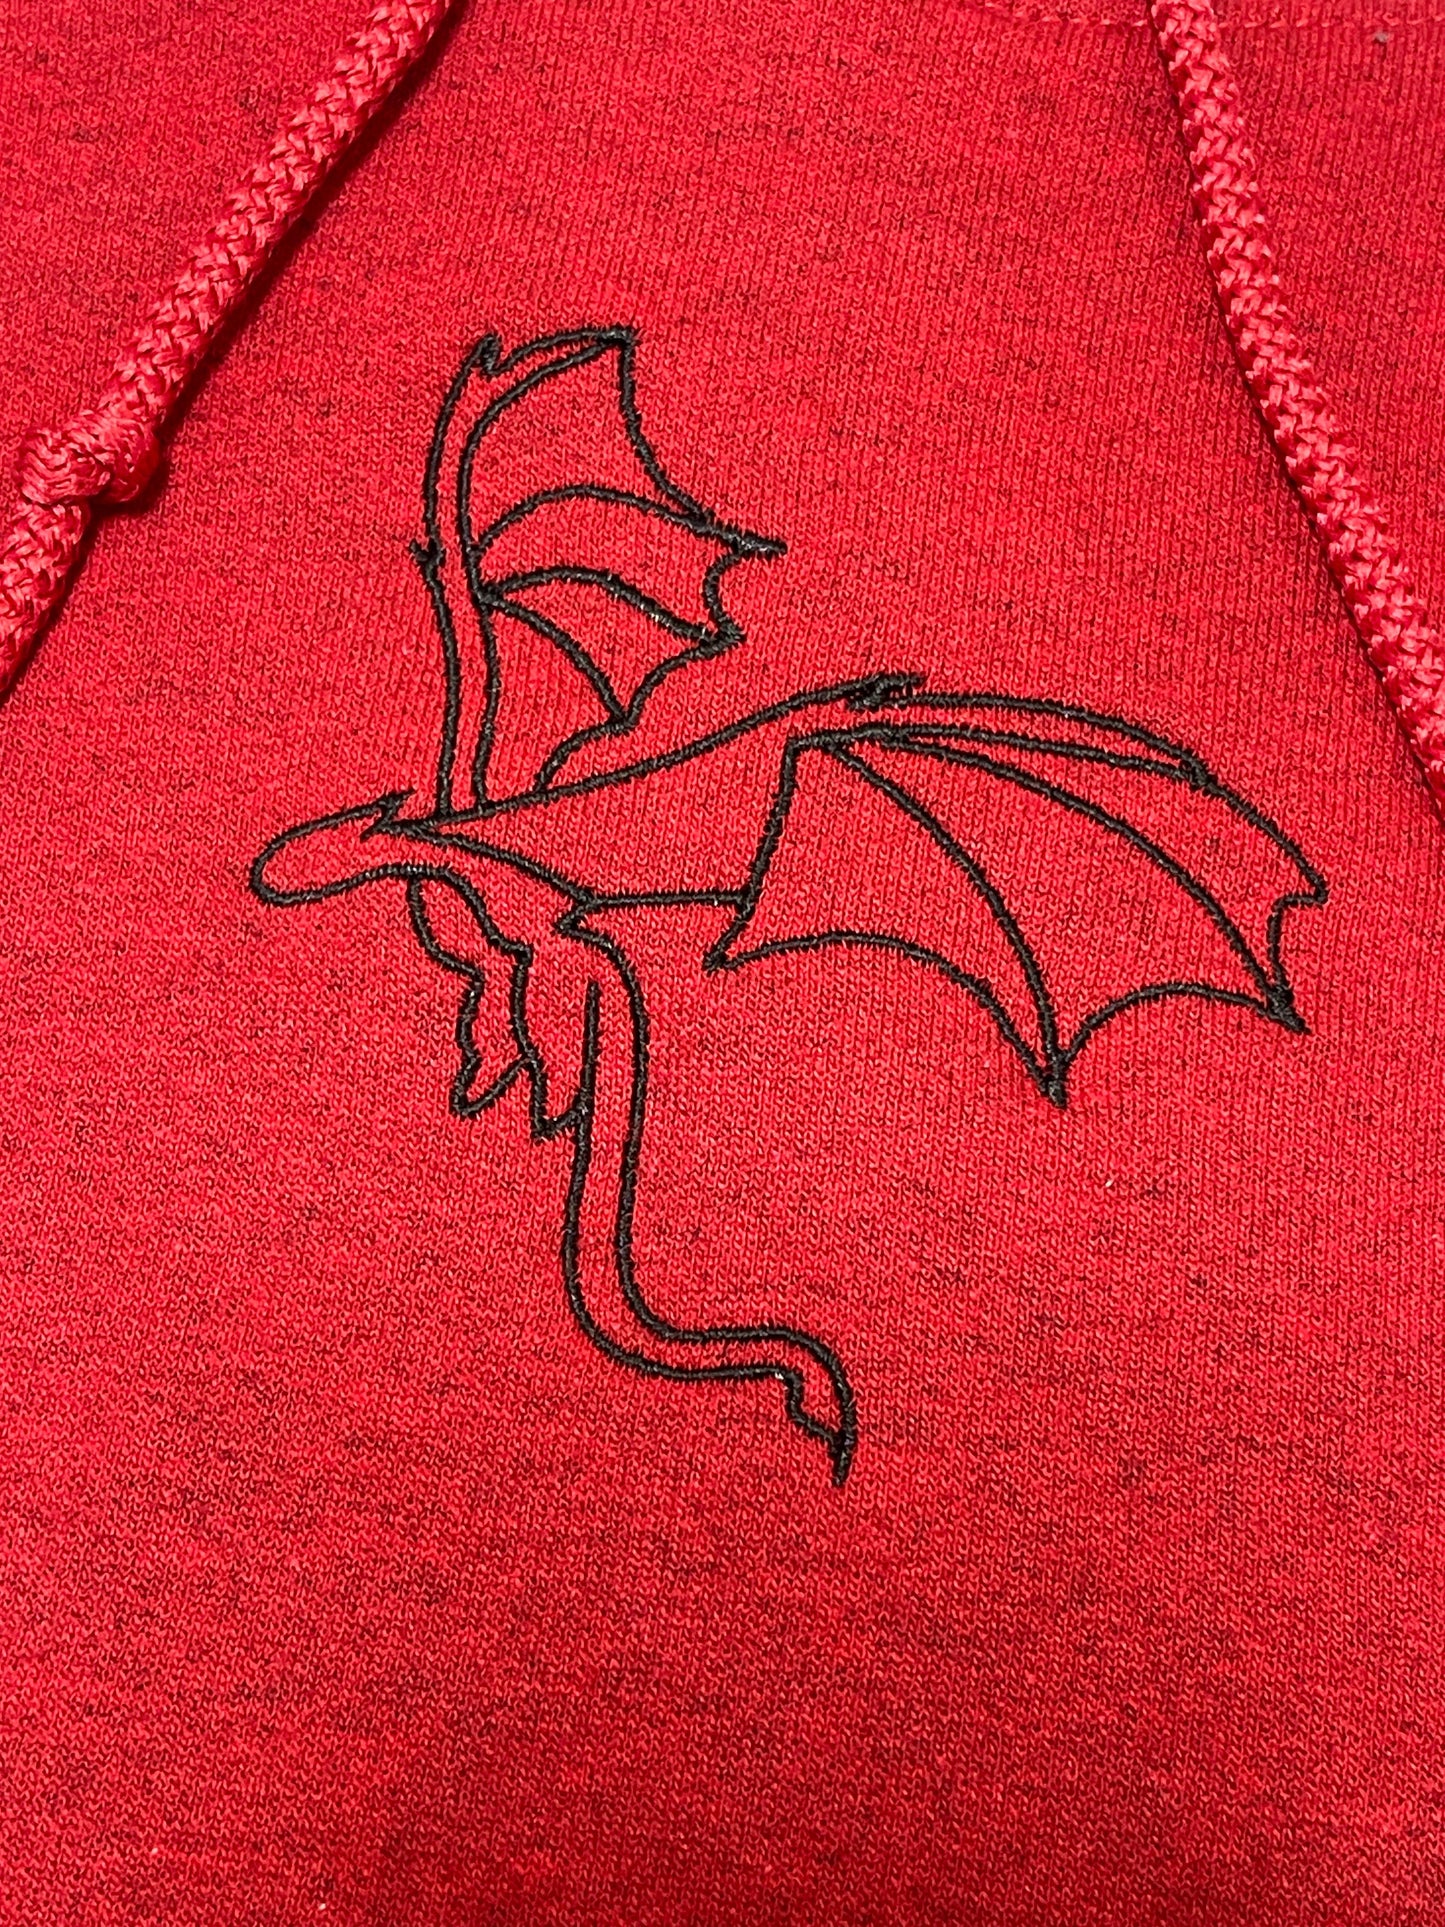 Left Facing Dragon Embroidery